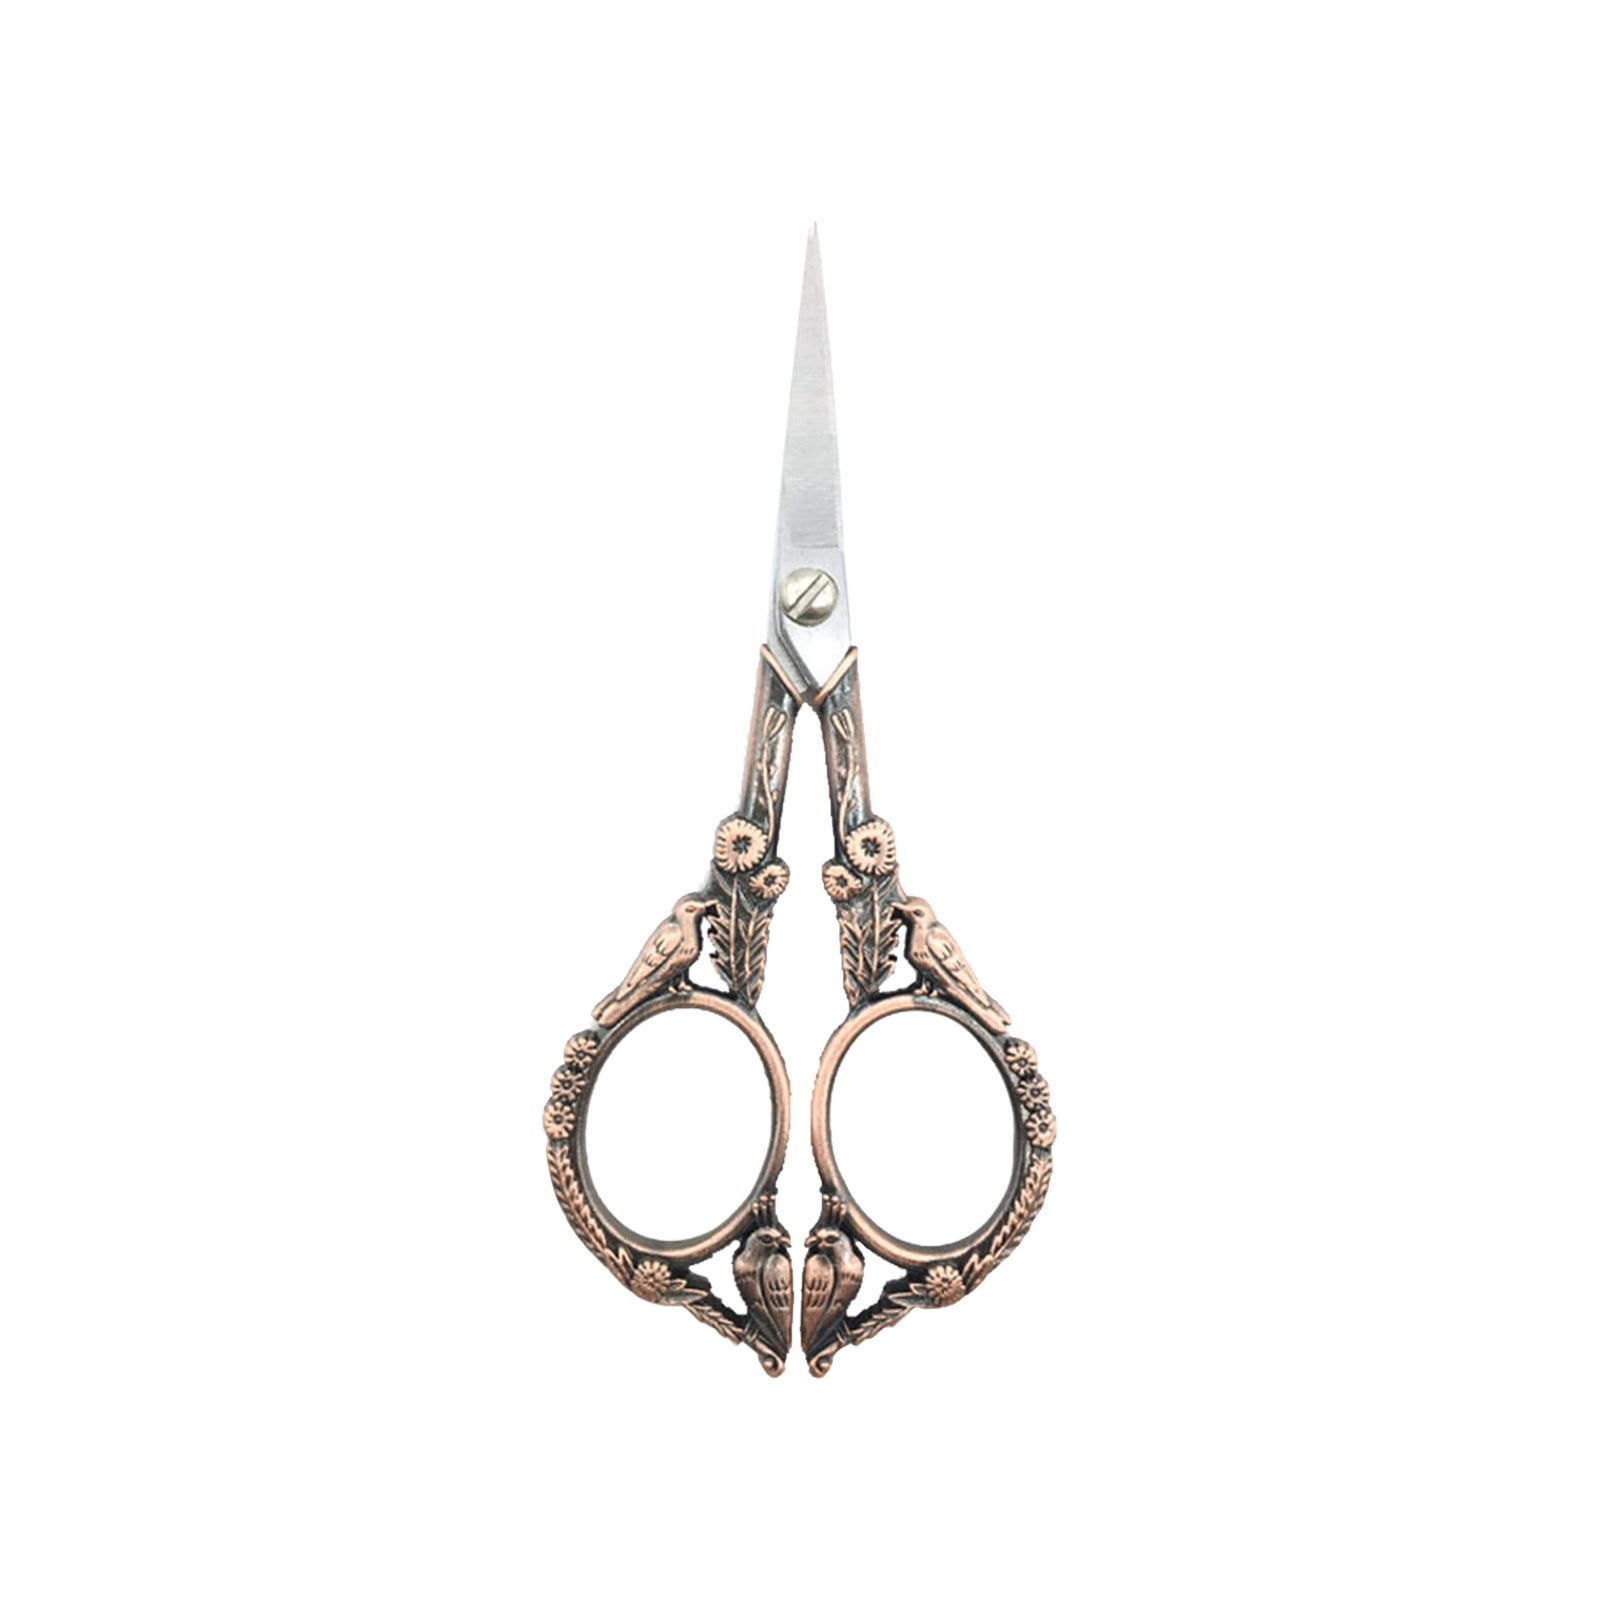 huaai embroidery scissors sewing embroidery scissors small vintage